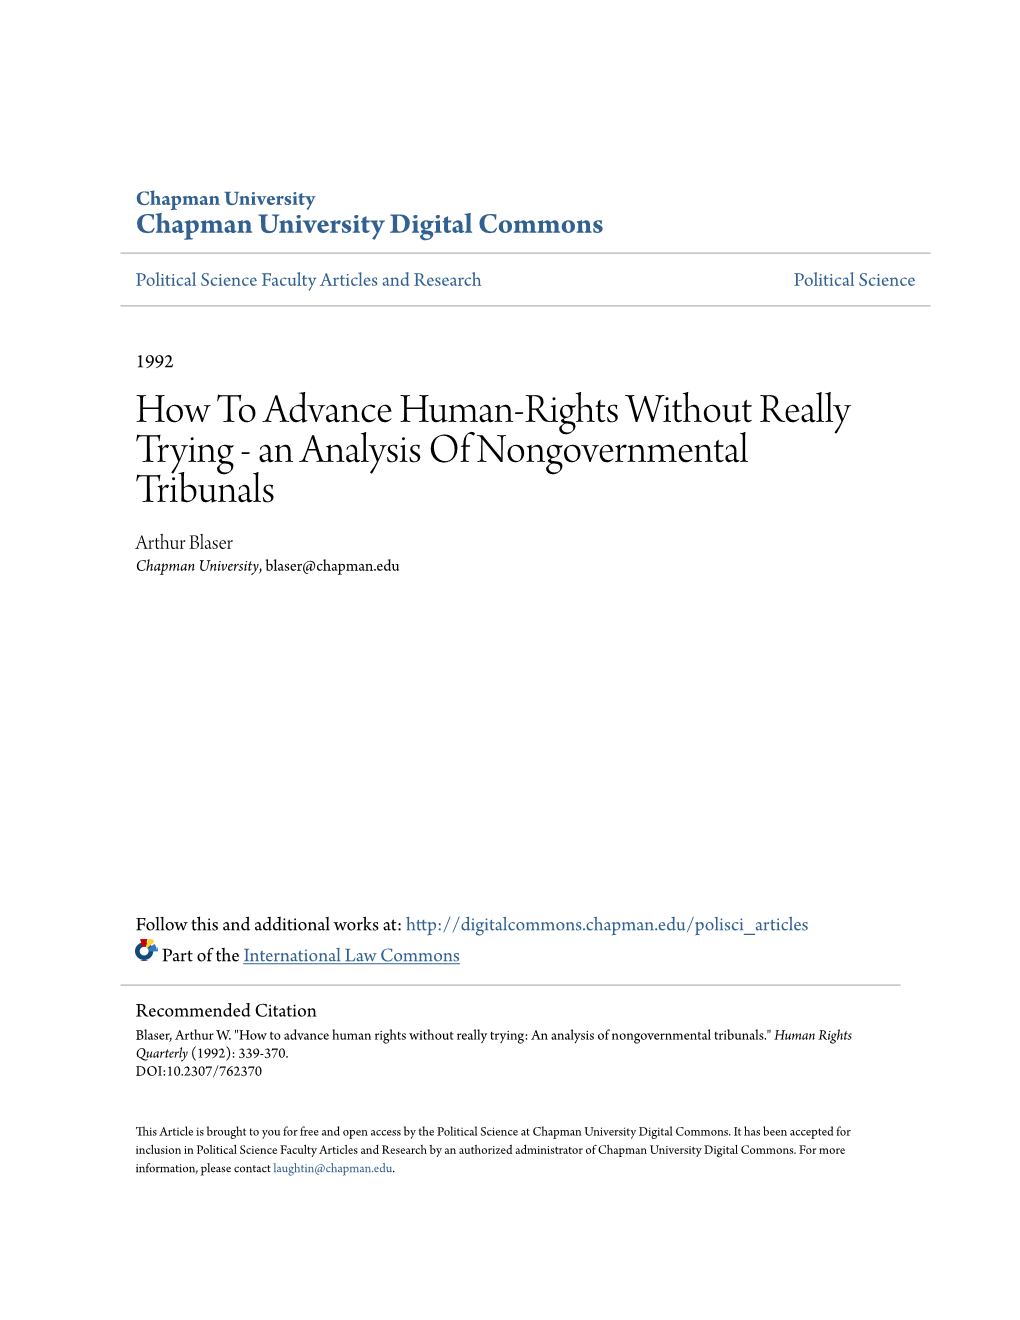 How to Advance Human-Rights Without Really Trying - an Analysis of Nongovernmental Tribunals Arthur Blaser Chapman University, Blaser@Chapman.Edu